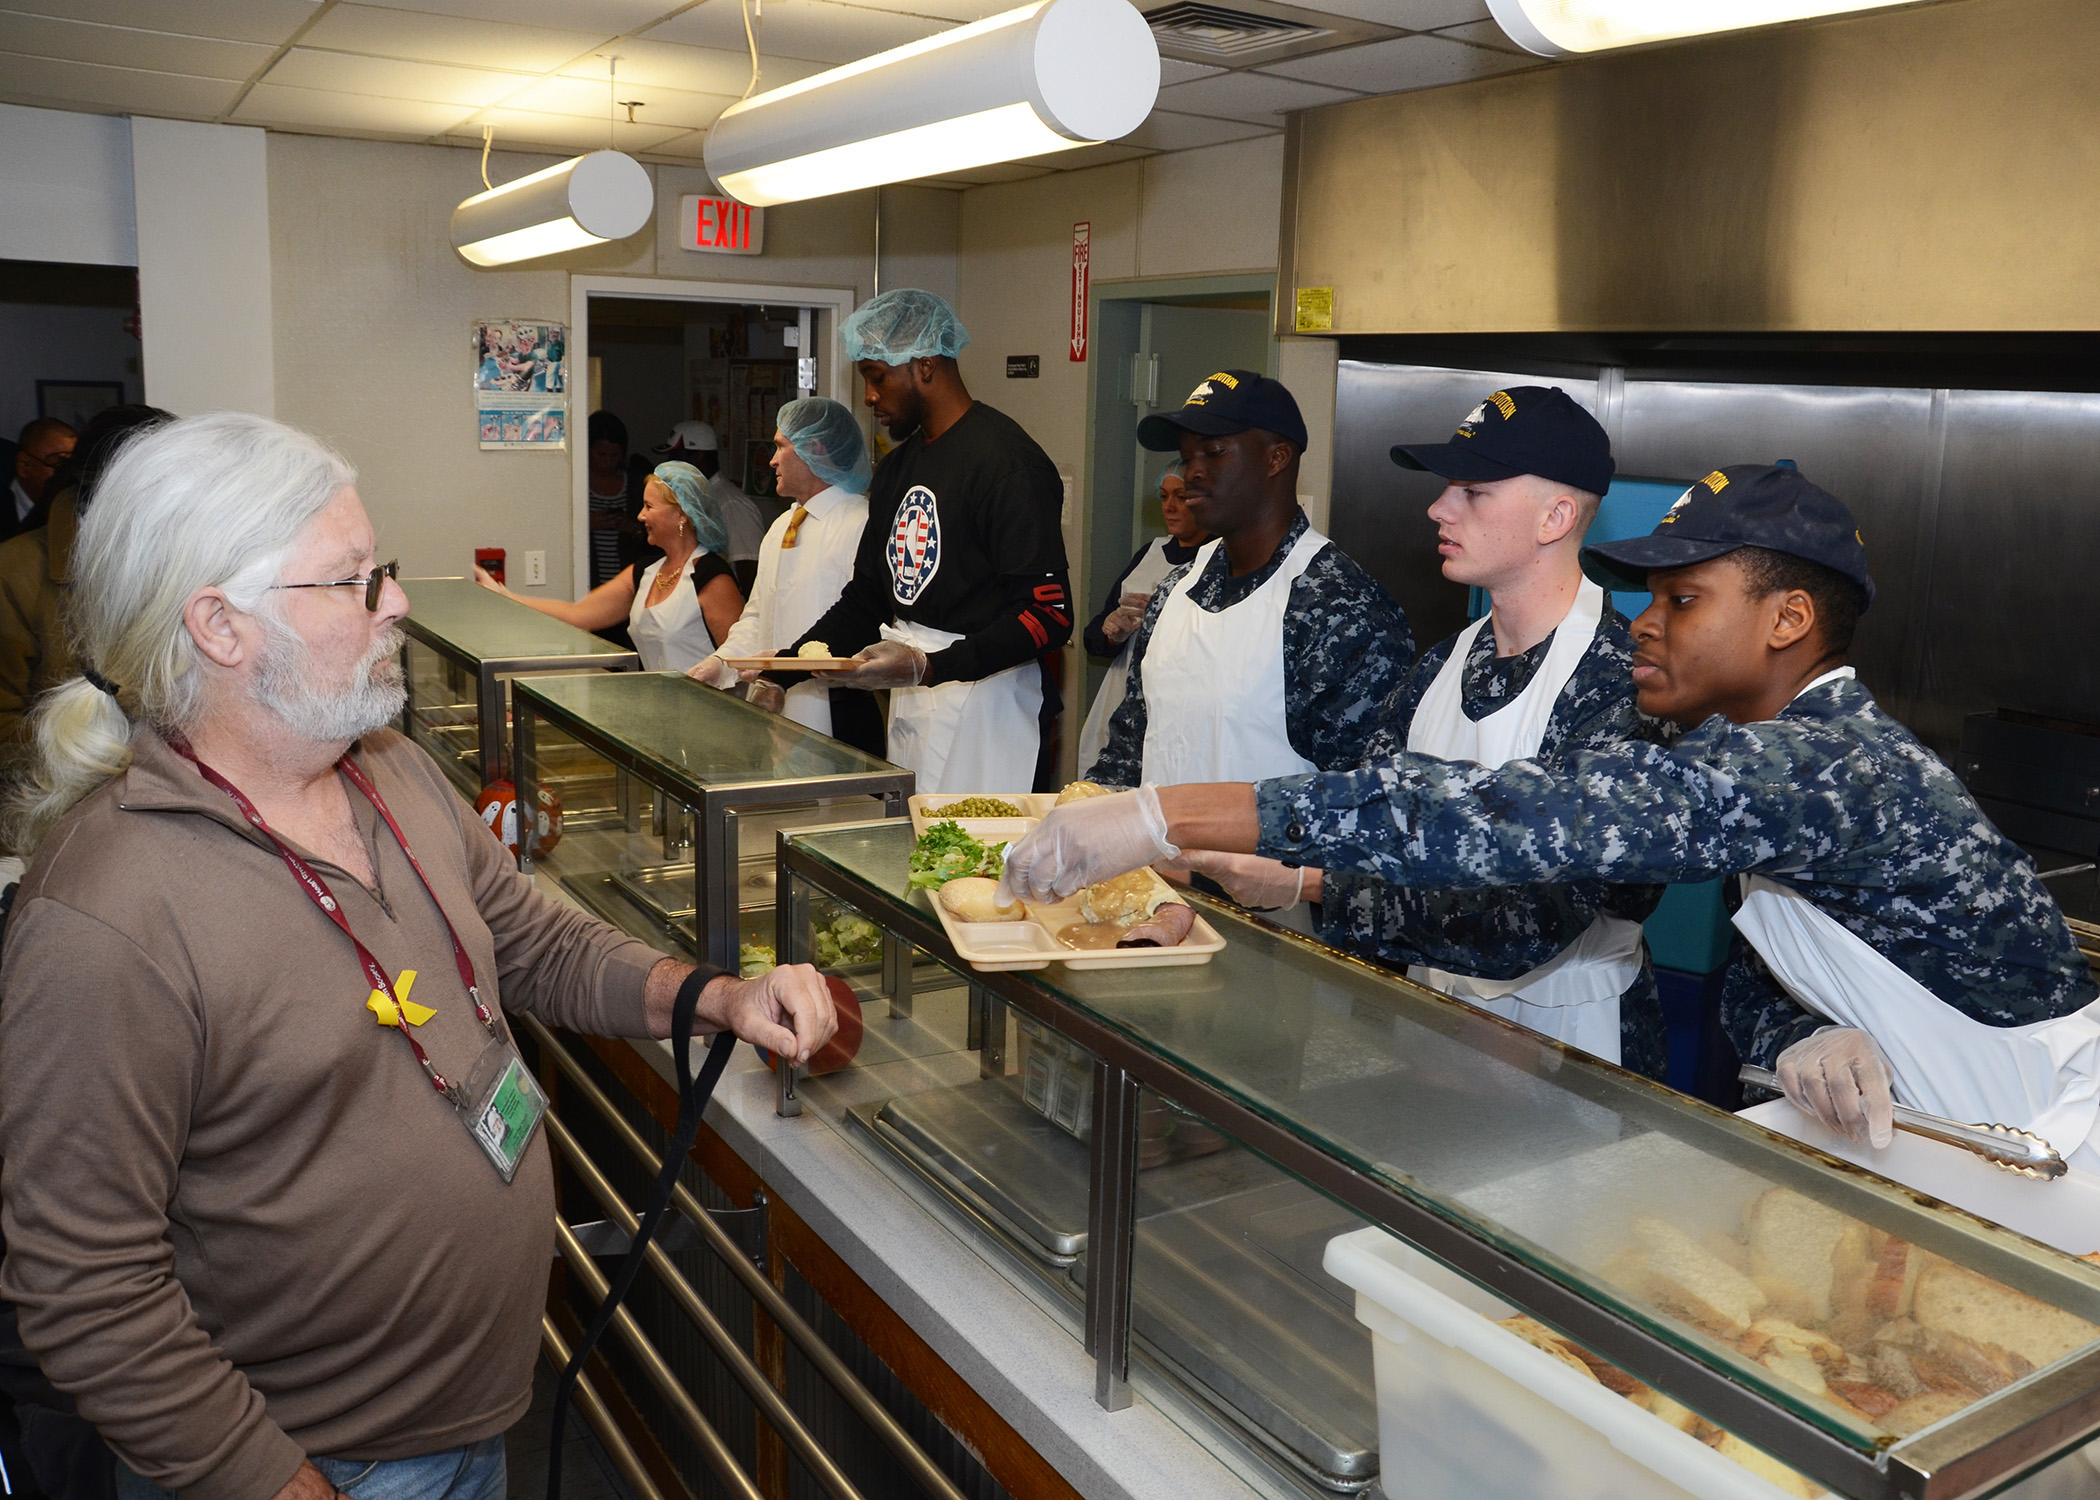 BOSTON (Nov. 10, 2014) Sailors assigned to USS Constitution, alongside Boston Celtics forward Jeff Green, help serve dinner to veterans during a collaborative pre-Veteran's Day volunteer event with the NBA at the New England Center for Homeless Veterans. Current and retired Celtics basketball players joined civilian and military volunteers from the U.S. Navy and Coast Guard to help paint rooms, organize donated clothing and serve hot meals for homeless veterans. U.S. Navy photo by Mass Communication Specialist 2nd Class Peter Melkus.